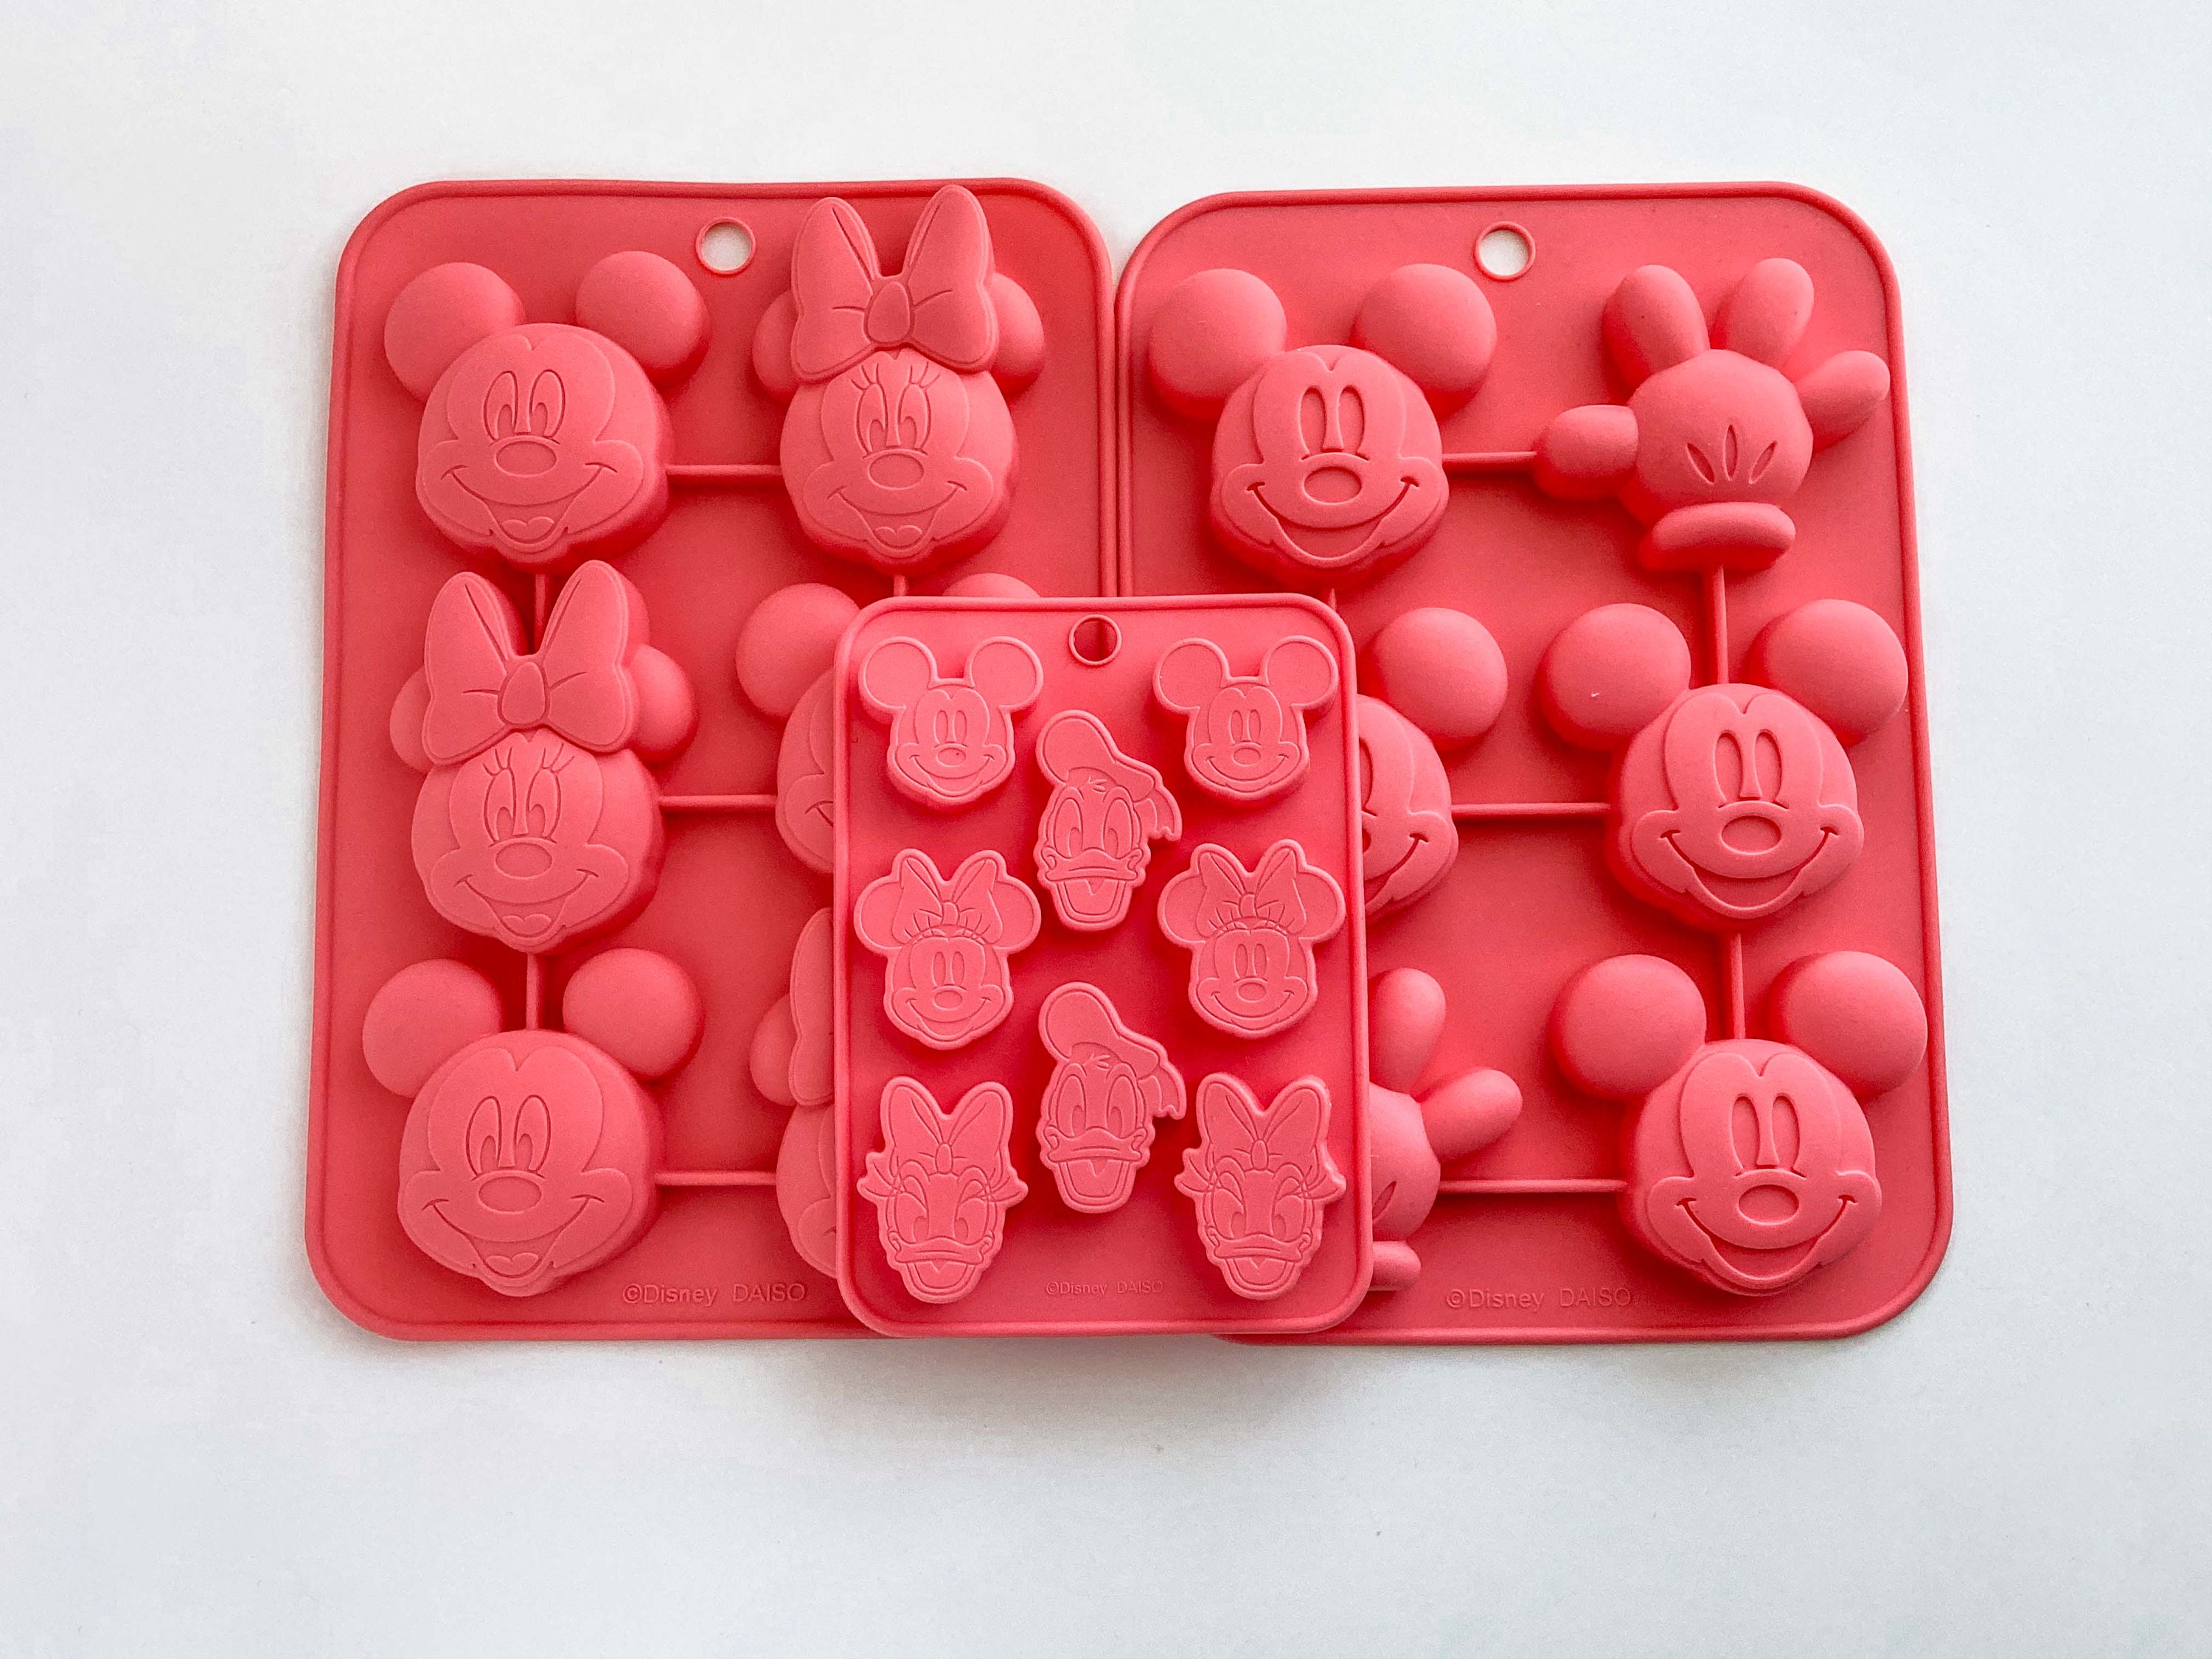 Review Disney Eats - Silicone Breakfast Molds - Oh Sweet Disney